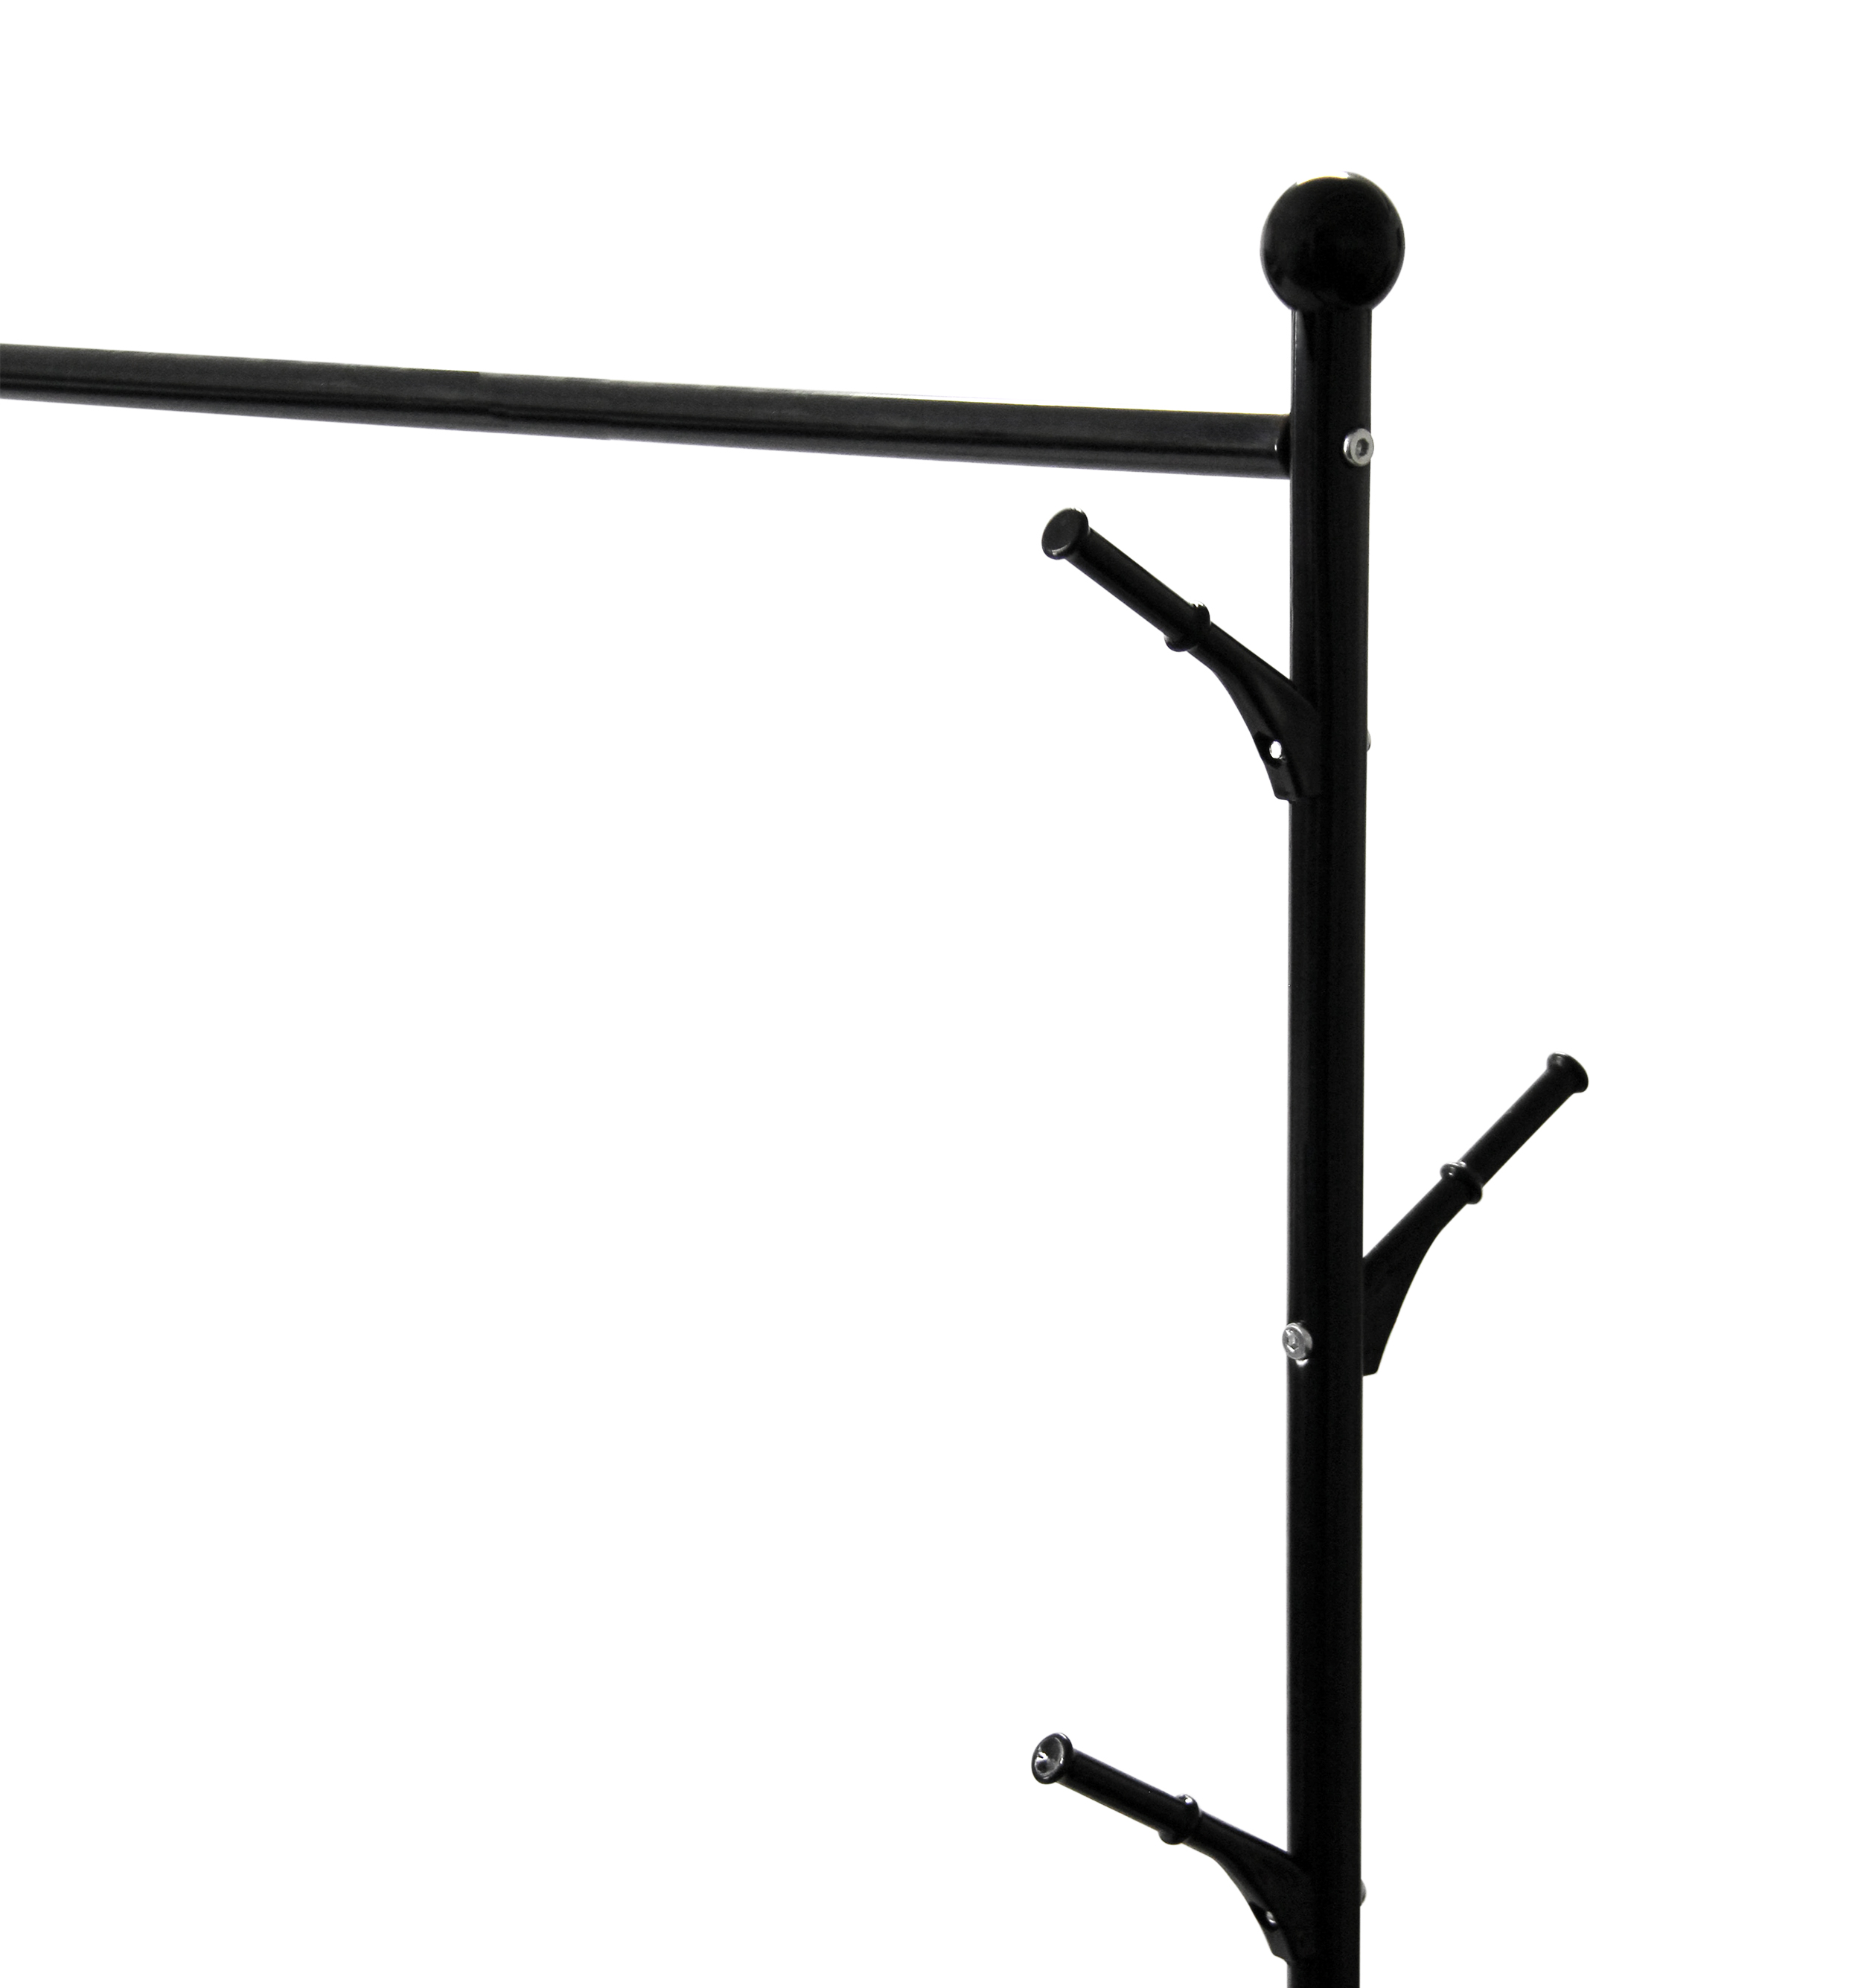 Racks & Stands - Fine Living - Vintage Hook Clothing Rack - Black was  listed for R499.00 on 29 Nov at 06:33 by Ontheline in South Africa  (ID:572018706)